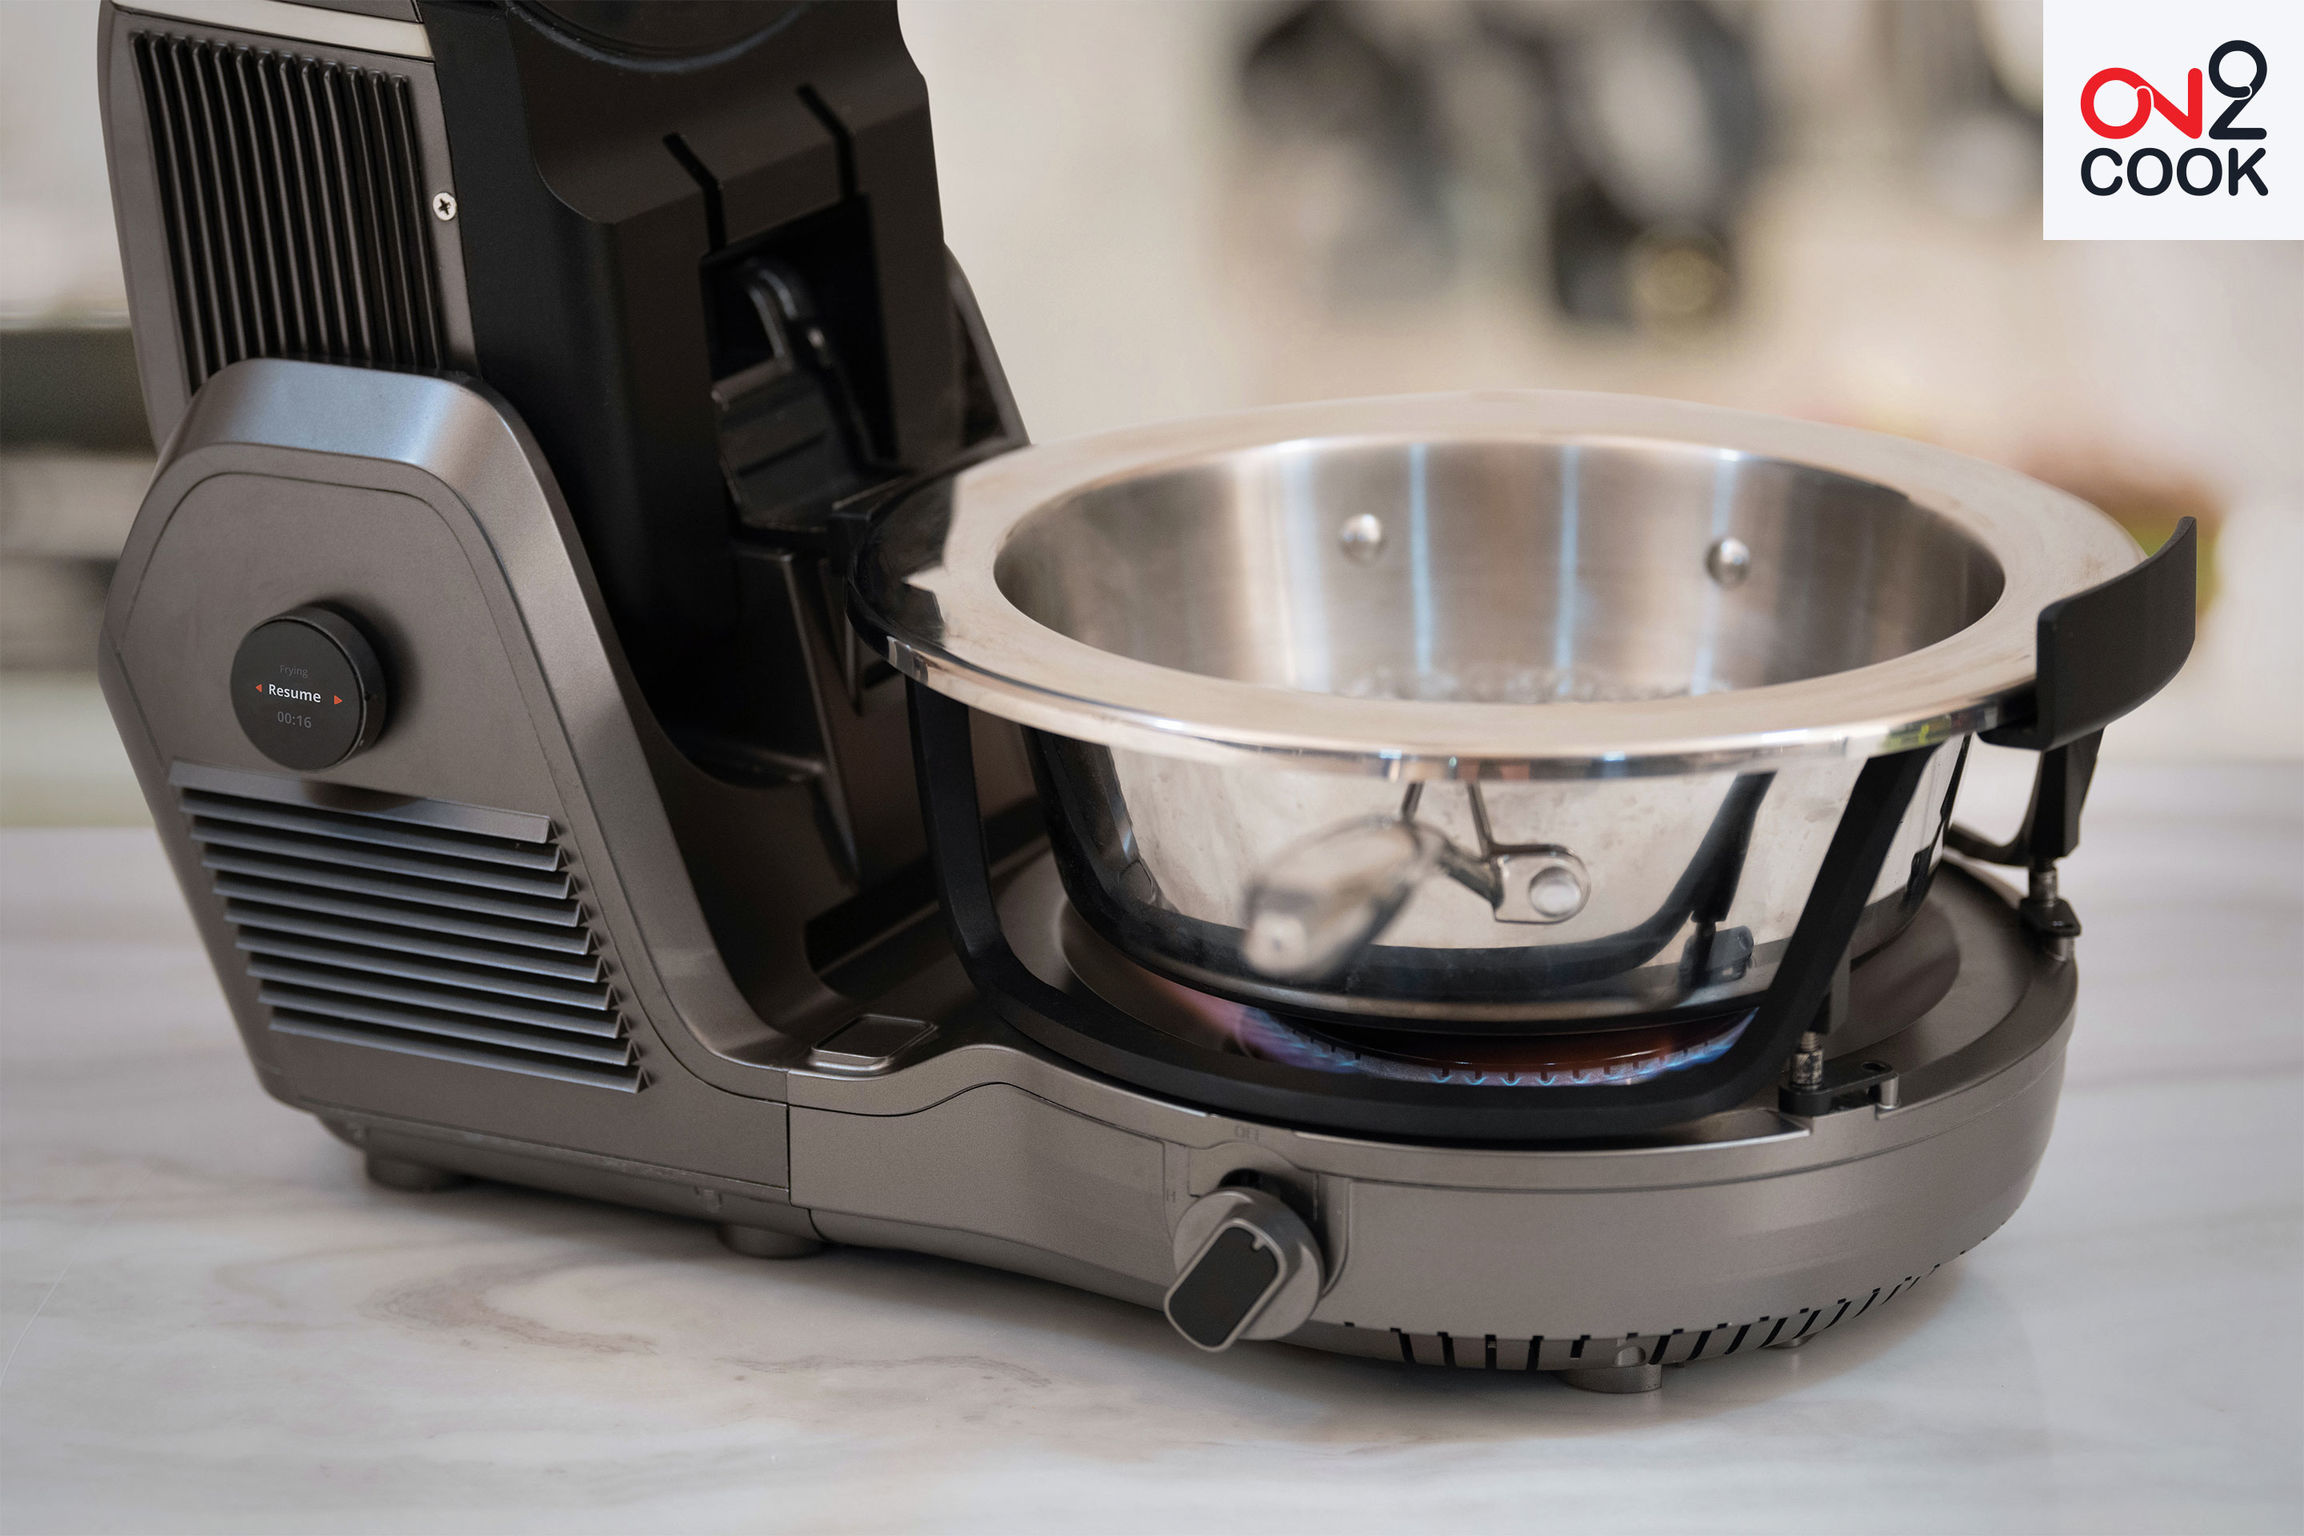 On2Cook: World’s Fastest Cooking Device